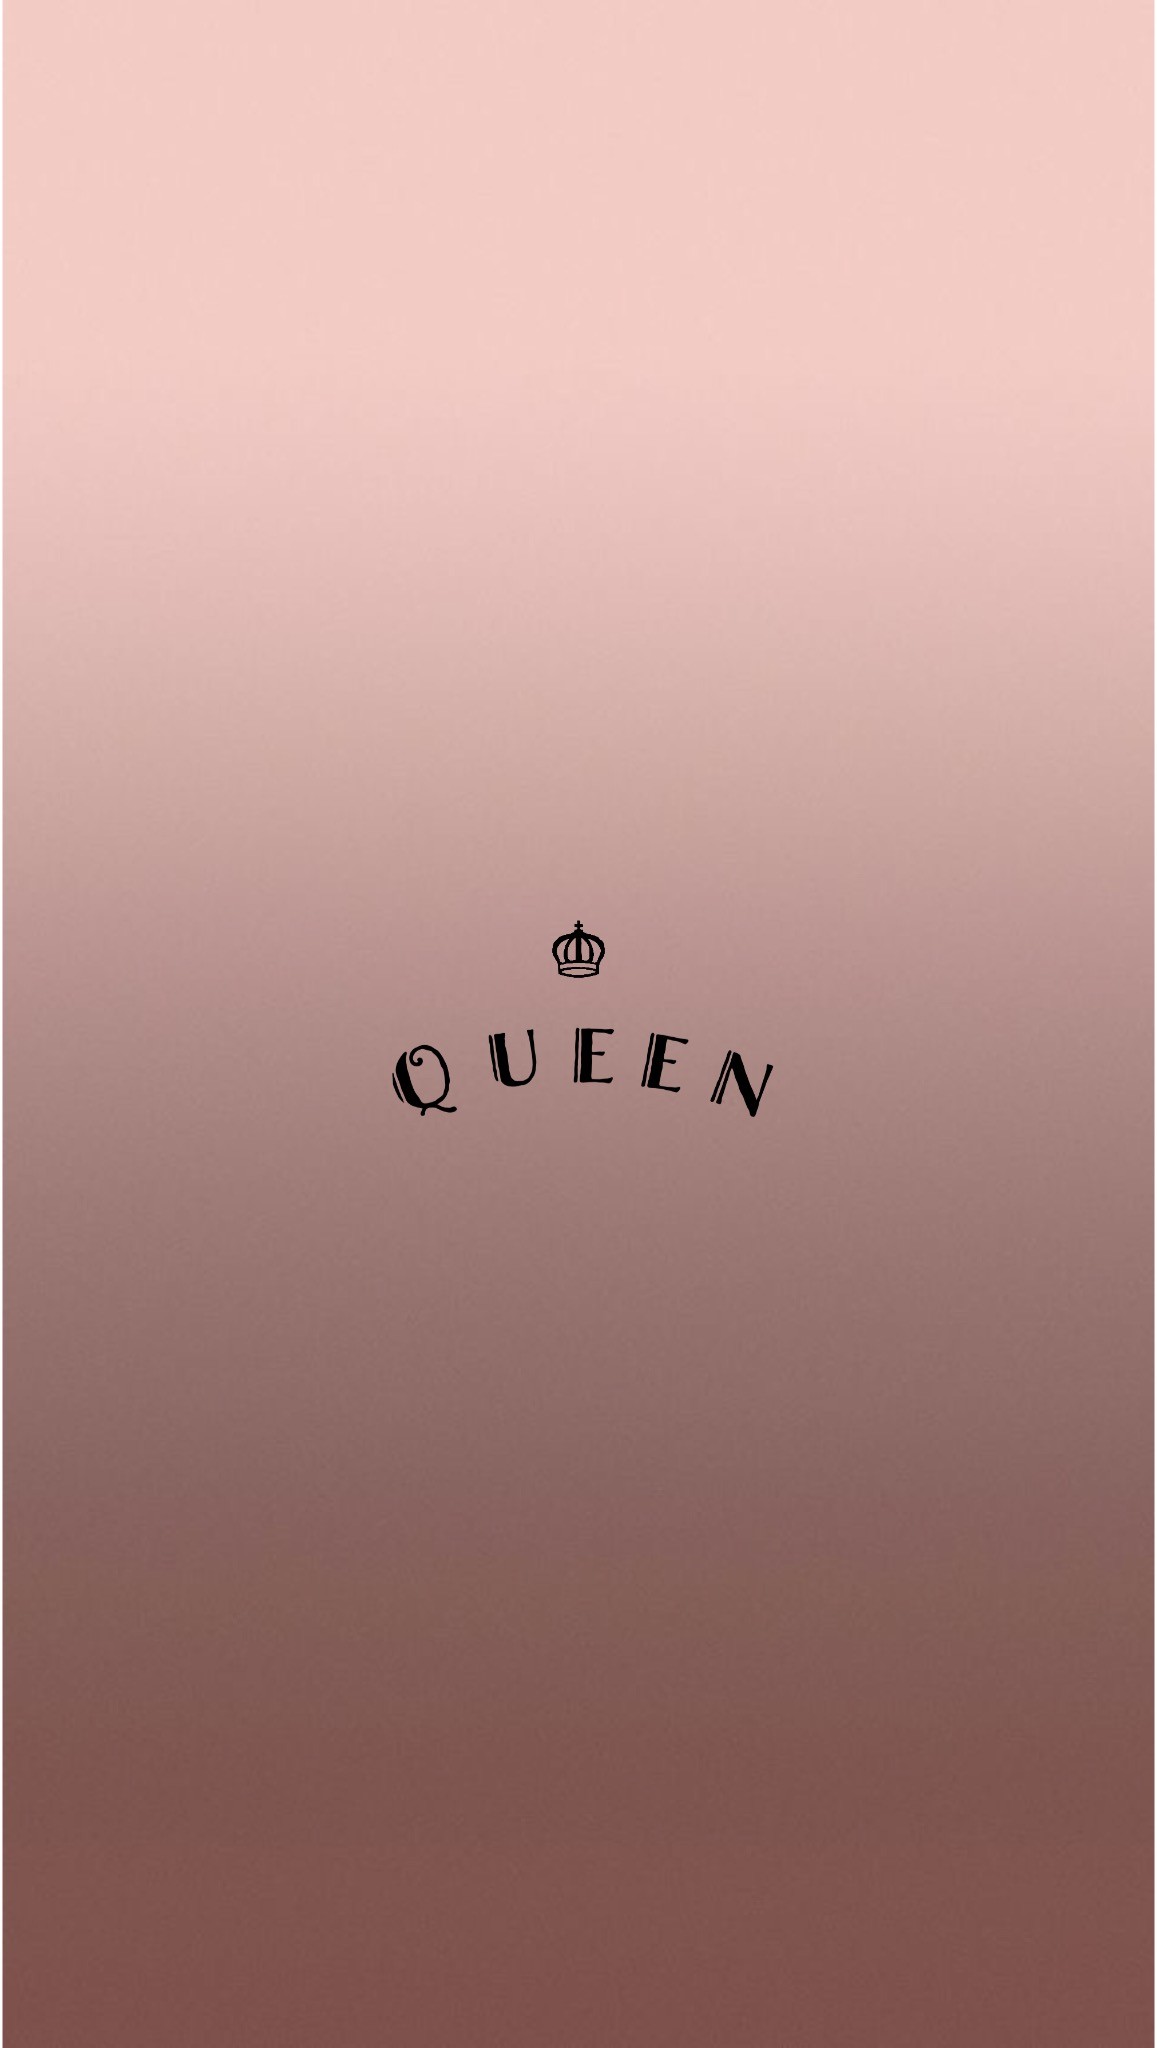 Rose Gold iPhone Wallpaper 79 images